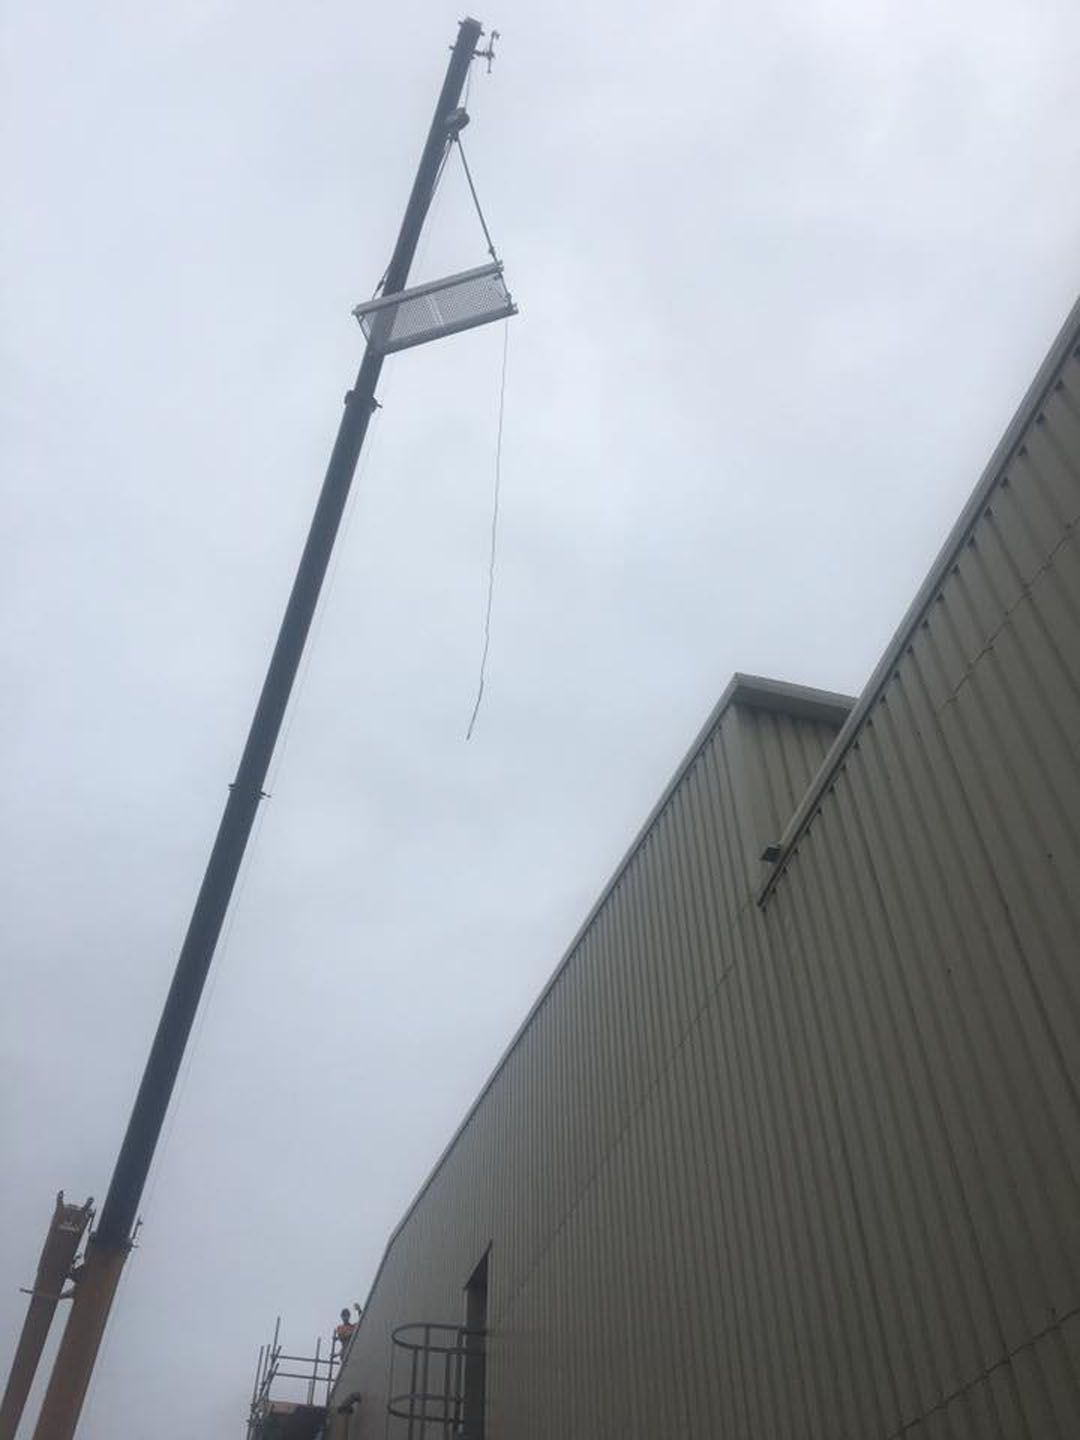 Lifting heaving object onto the roof